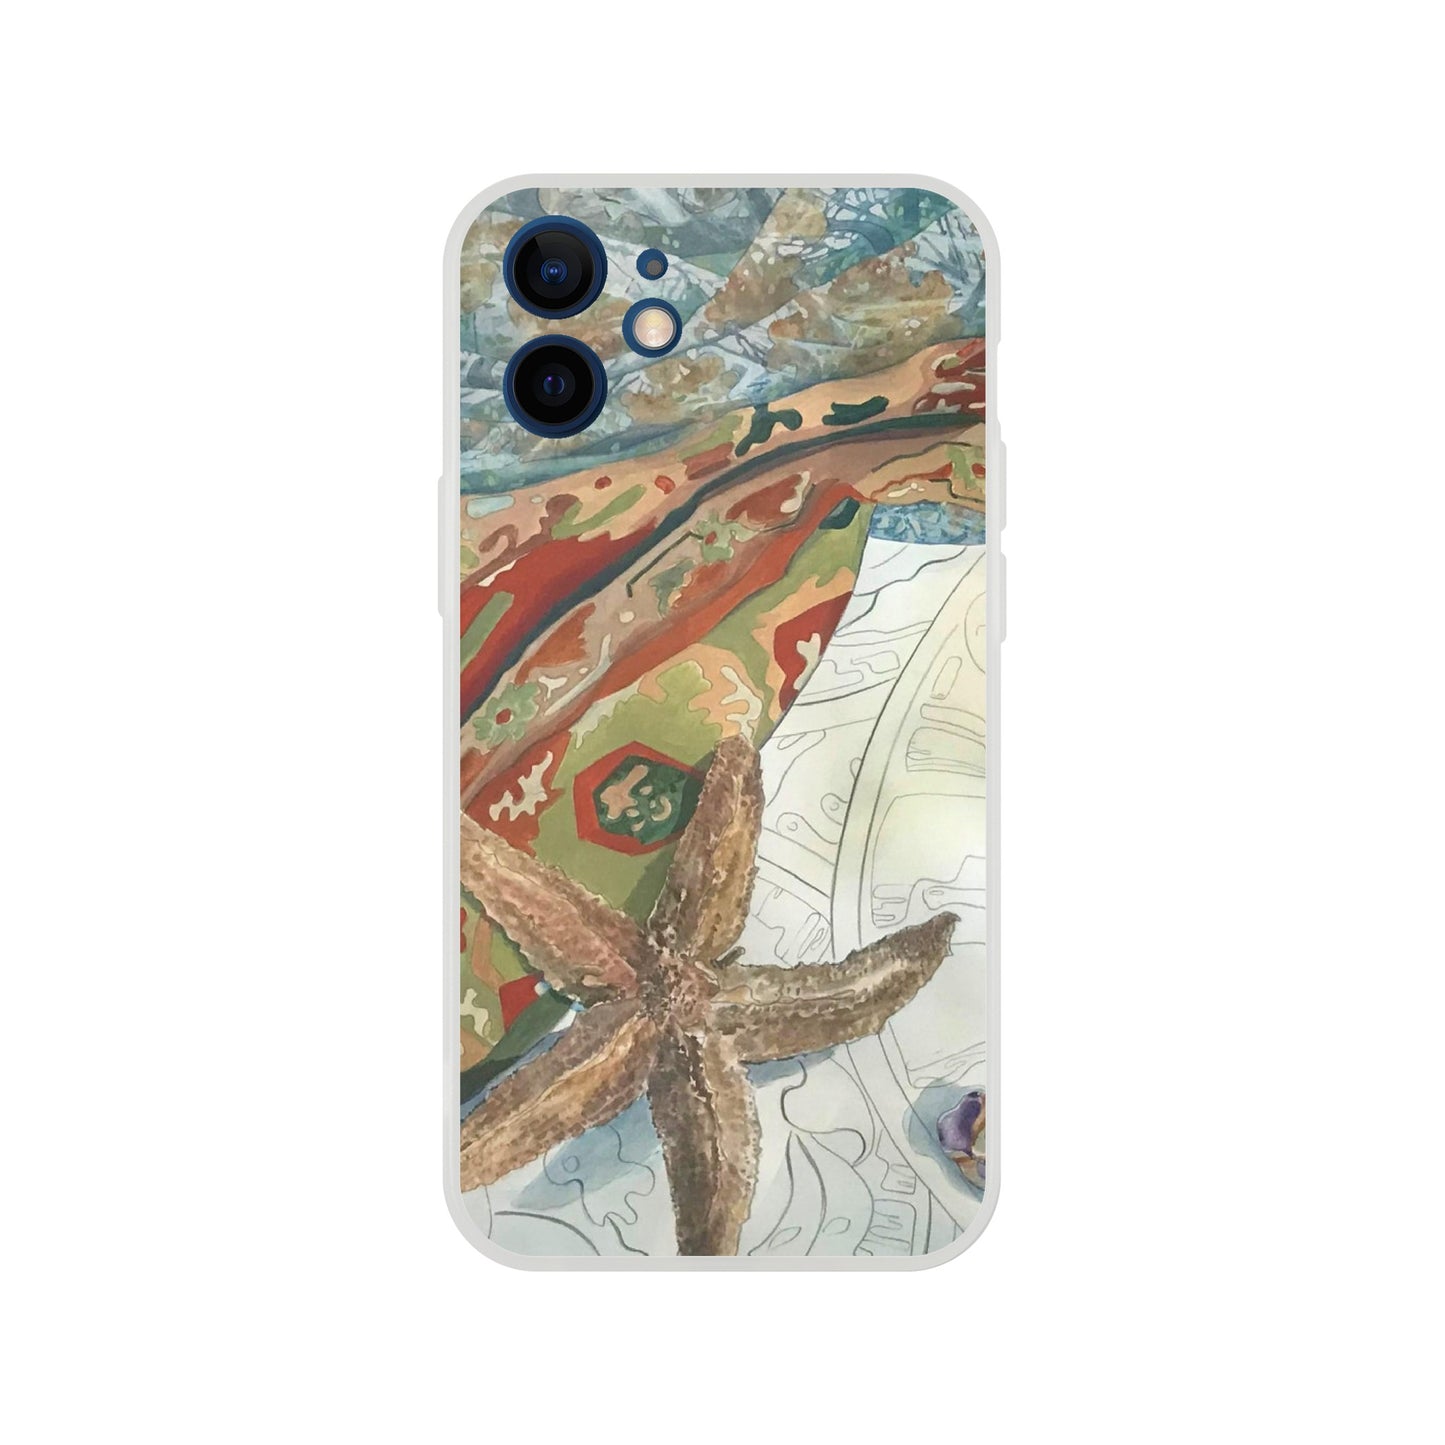 "Shells" Flexi Phone Case for Iphone or Samsung by Barbara Cleary Designs